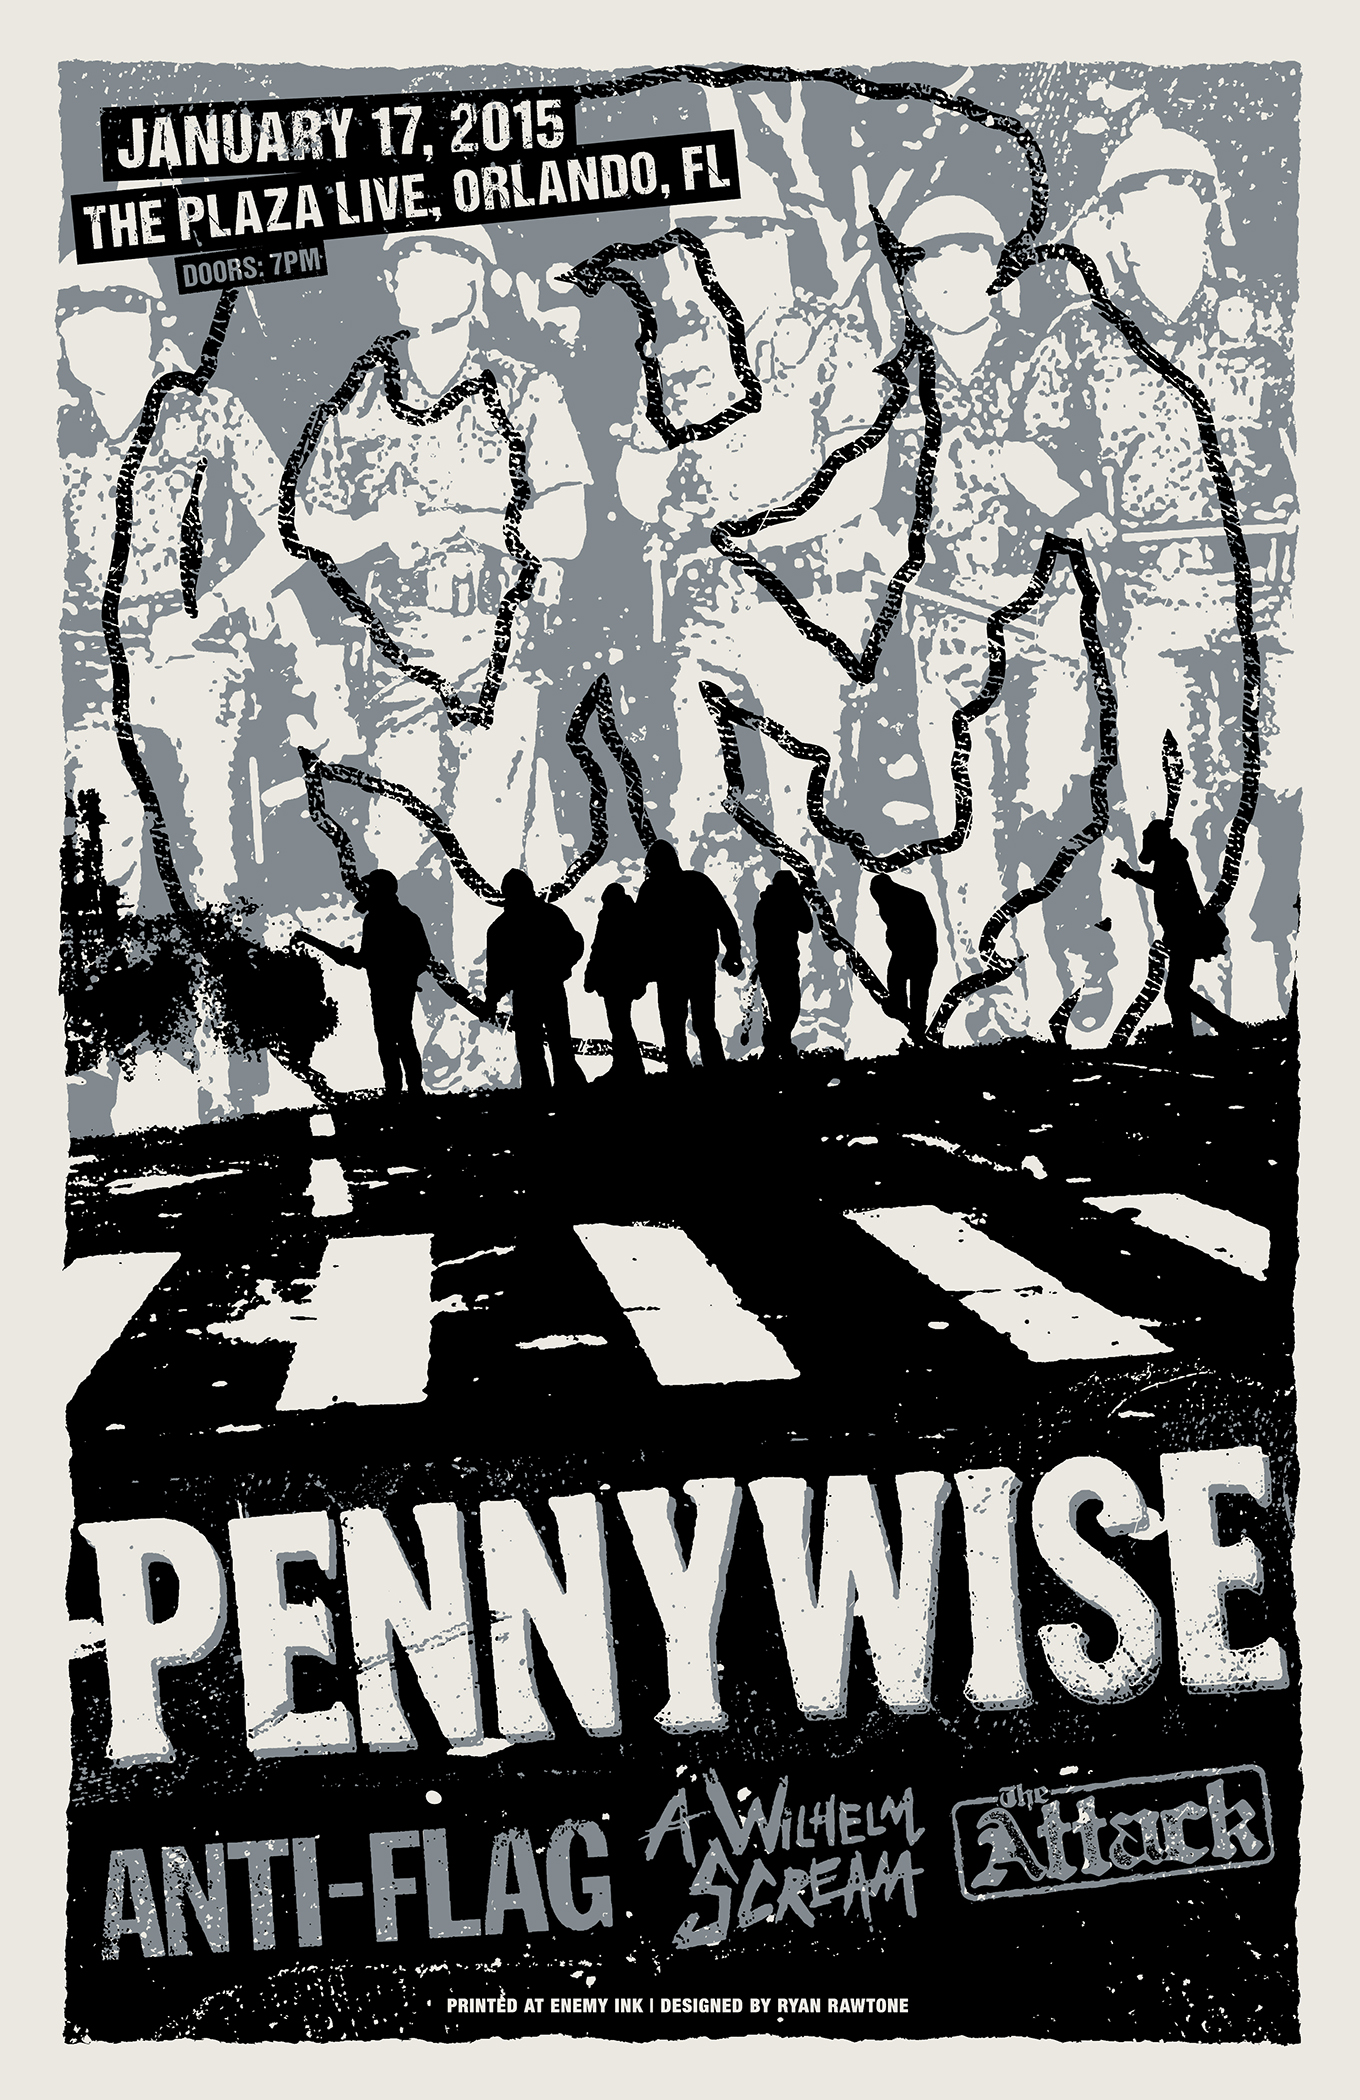 Pennywise_Anti-Flag_Attack_Jan17_poster